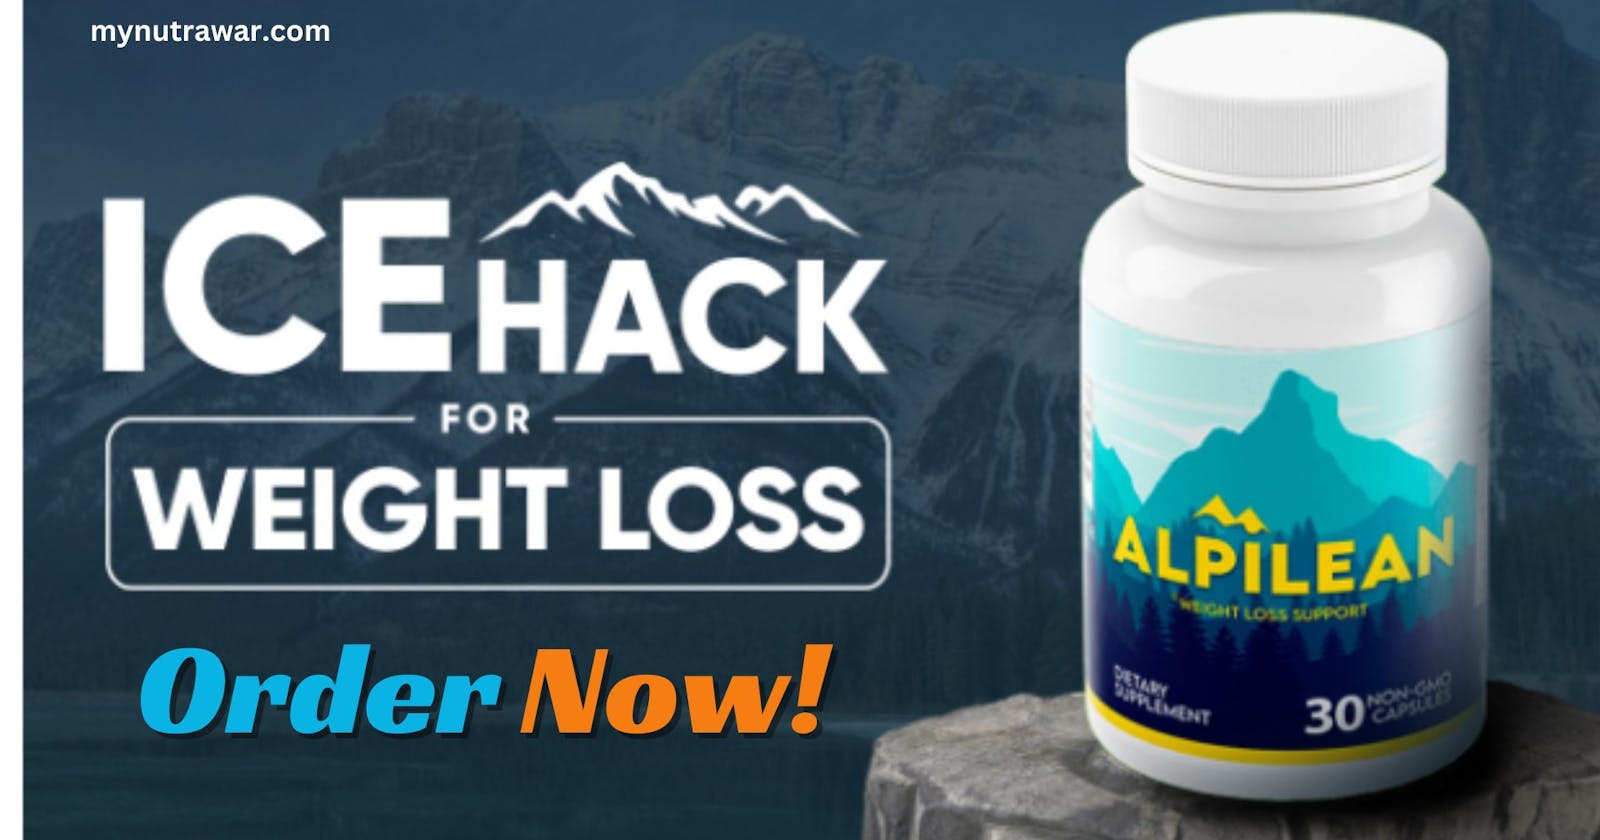 Alpine Ice Hack Secrets: The Ultimate Hack for Rapid Weight Loss!